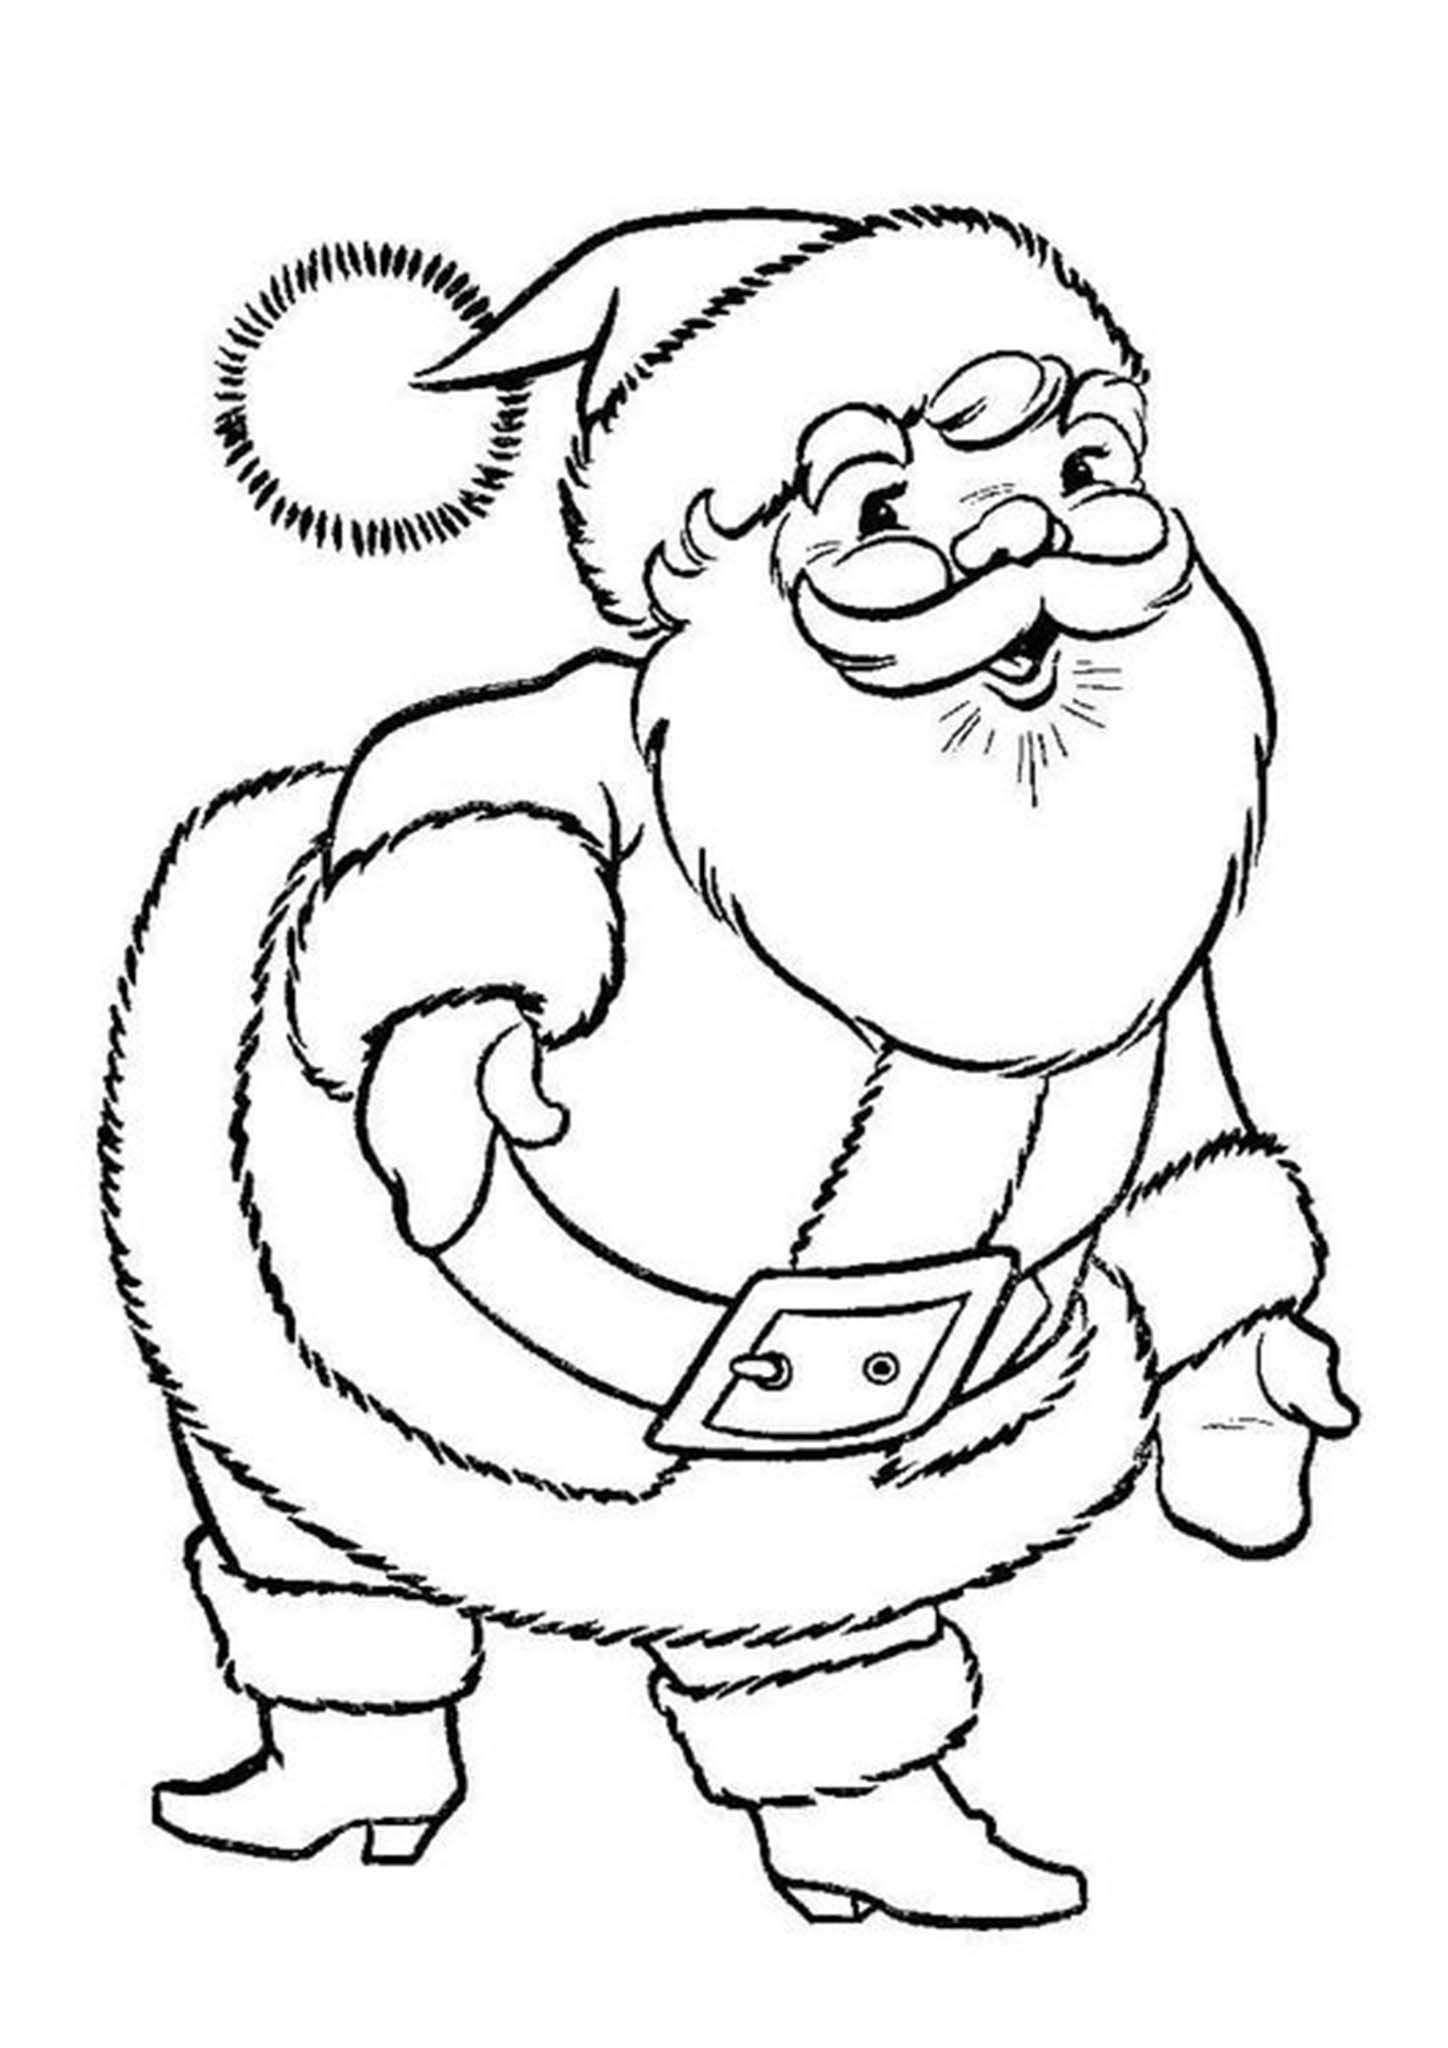 Santa Claus with Reindeer coloring page